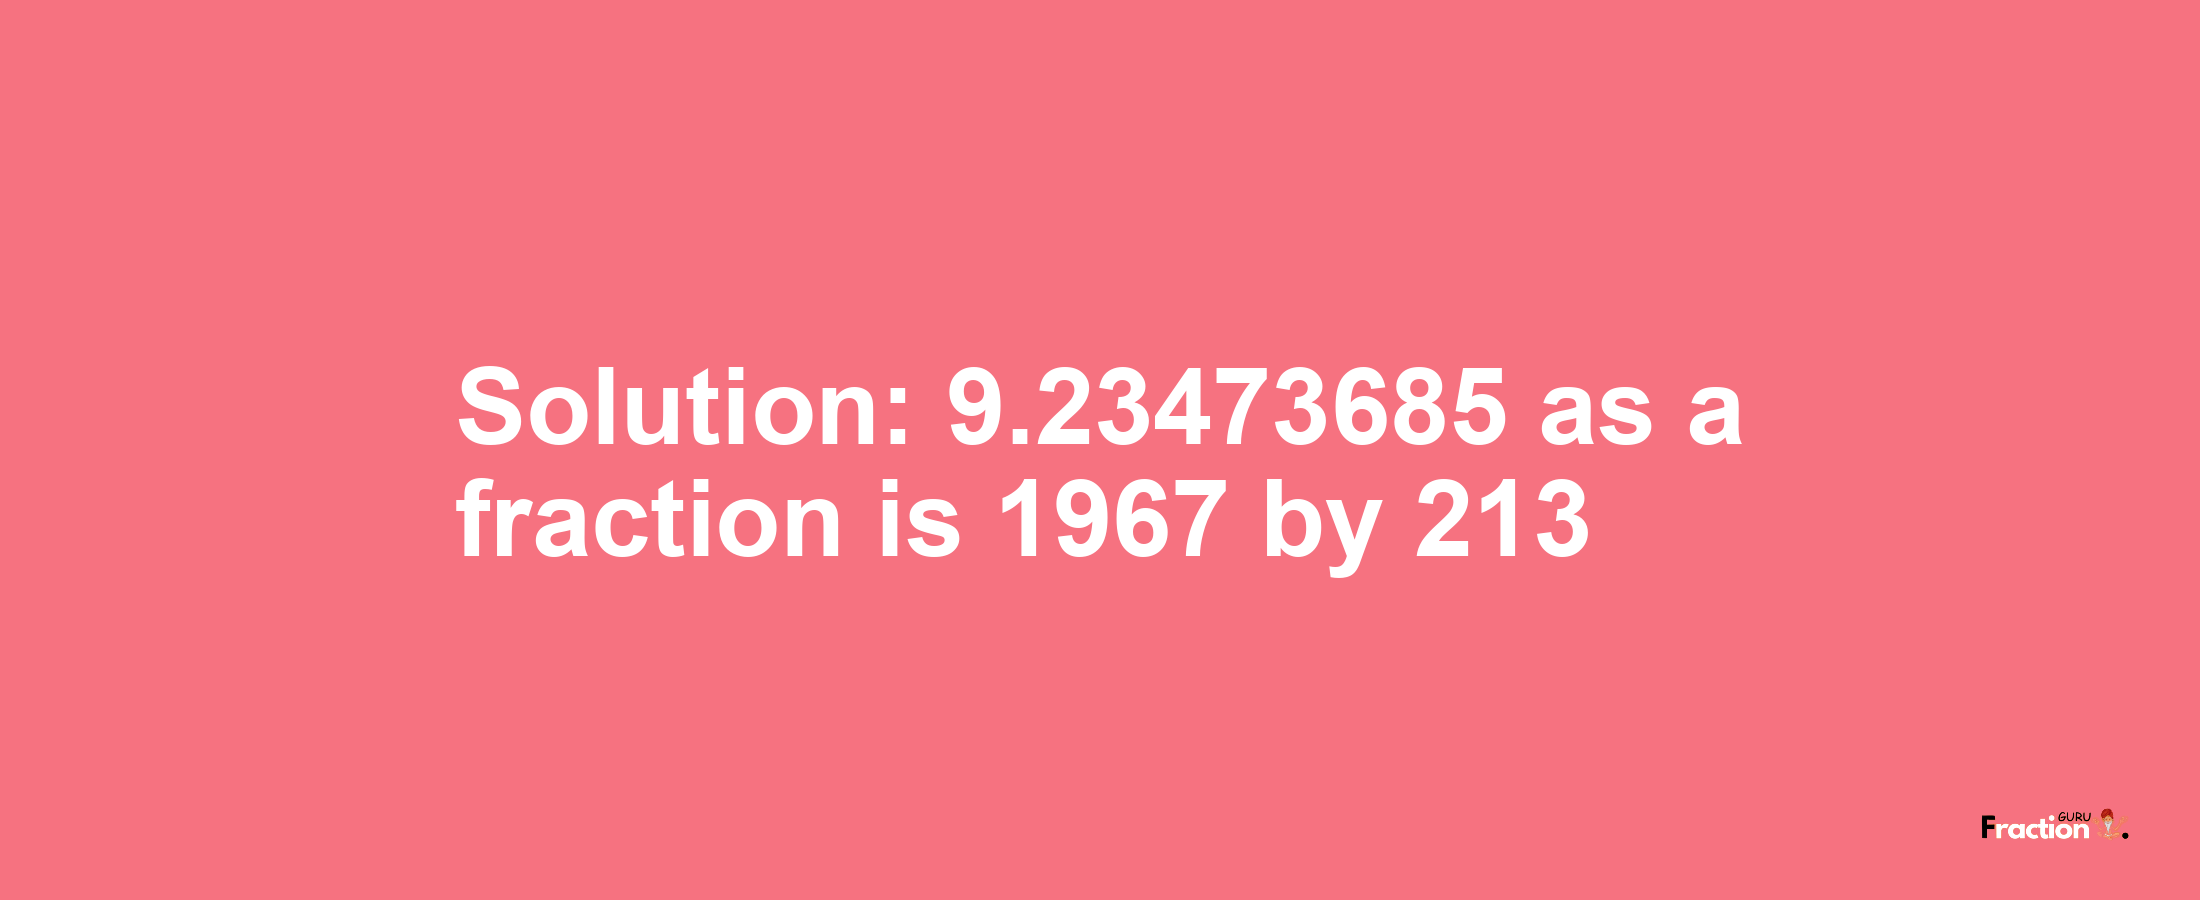 Solution:9.23473685 as a fraction is 1967/213